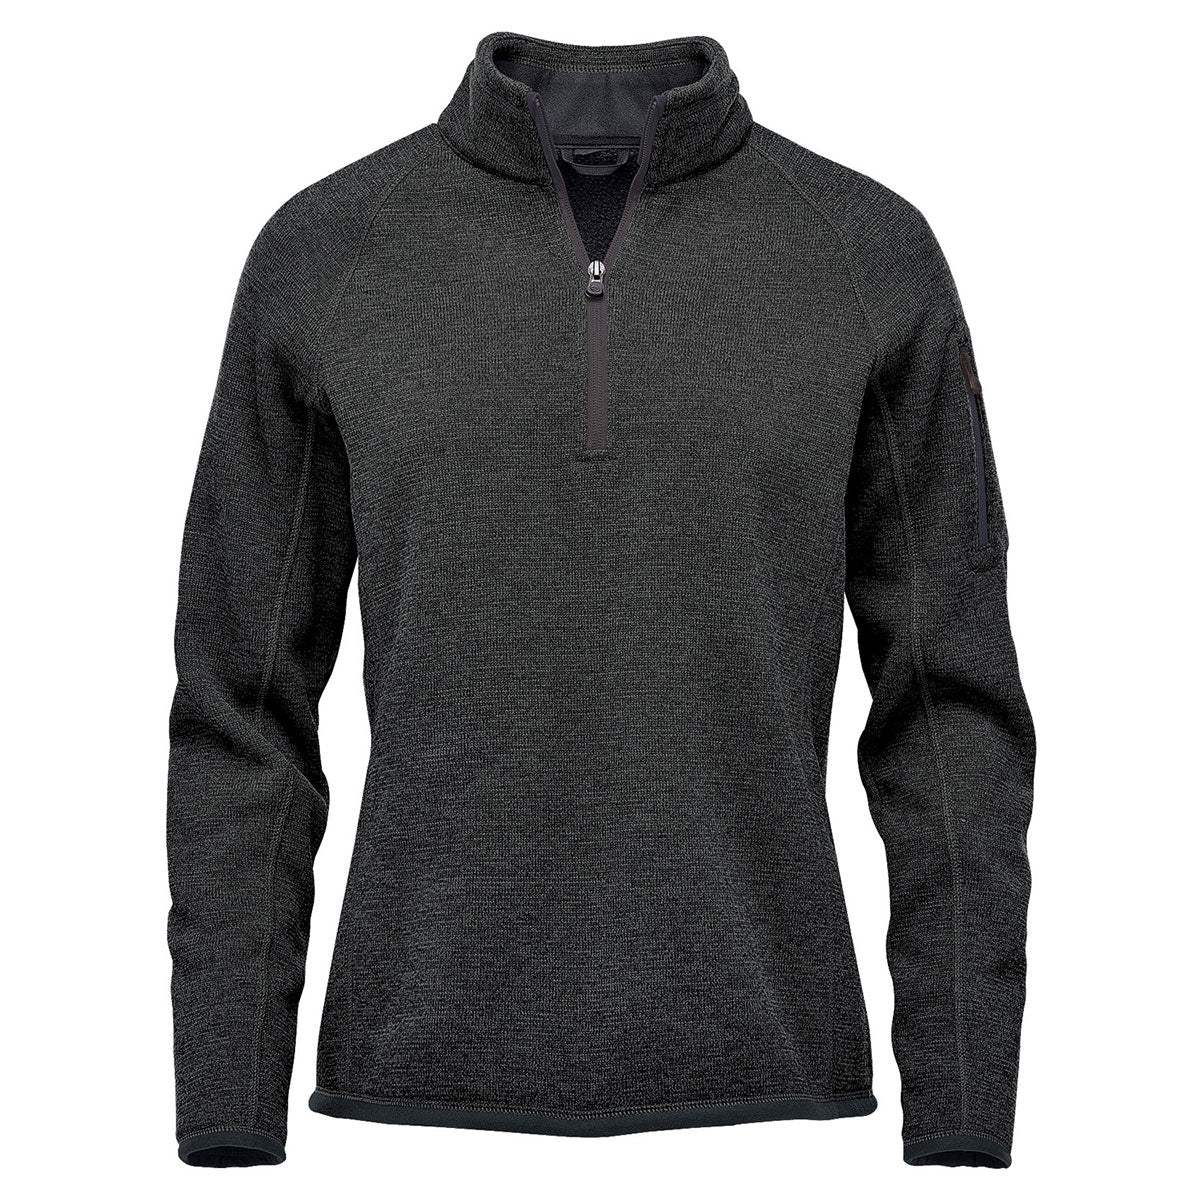 Women’s Avalante 1/4 Zip Pullover by Stormtech - Promotions Only Group Limited